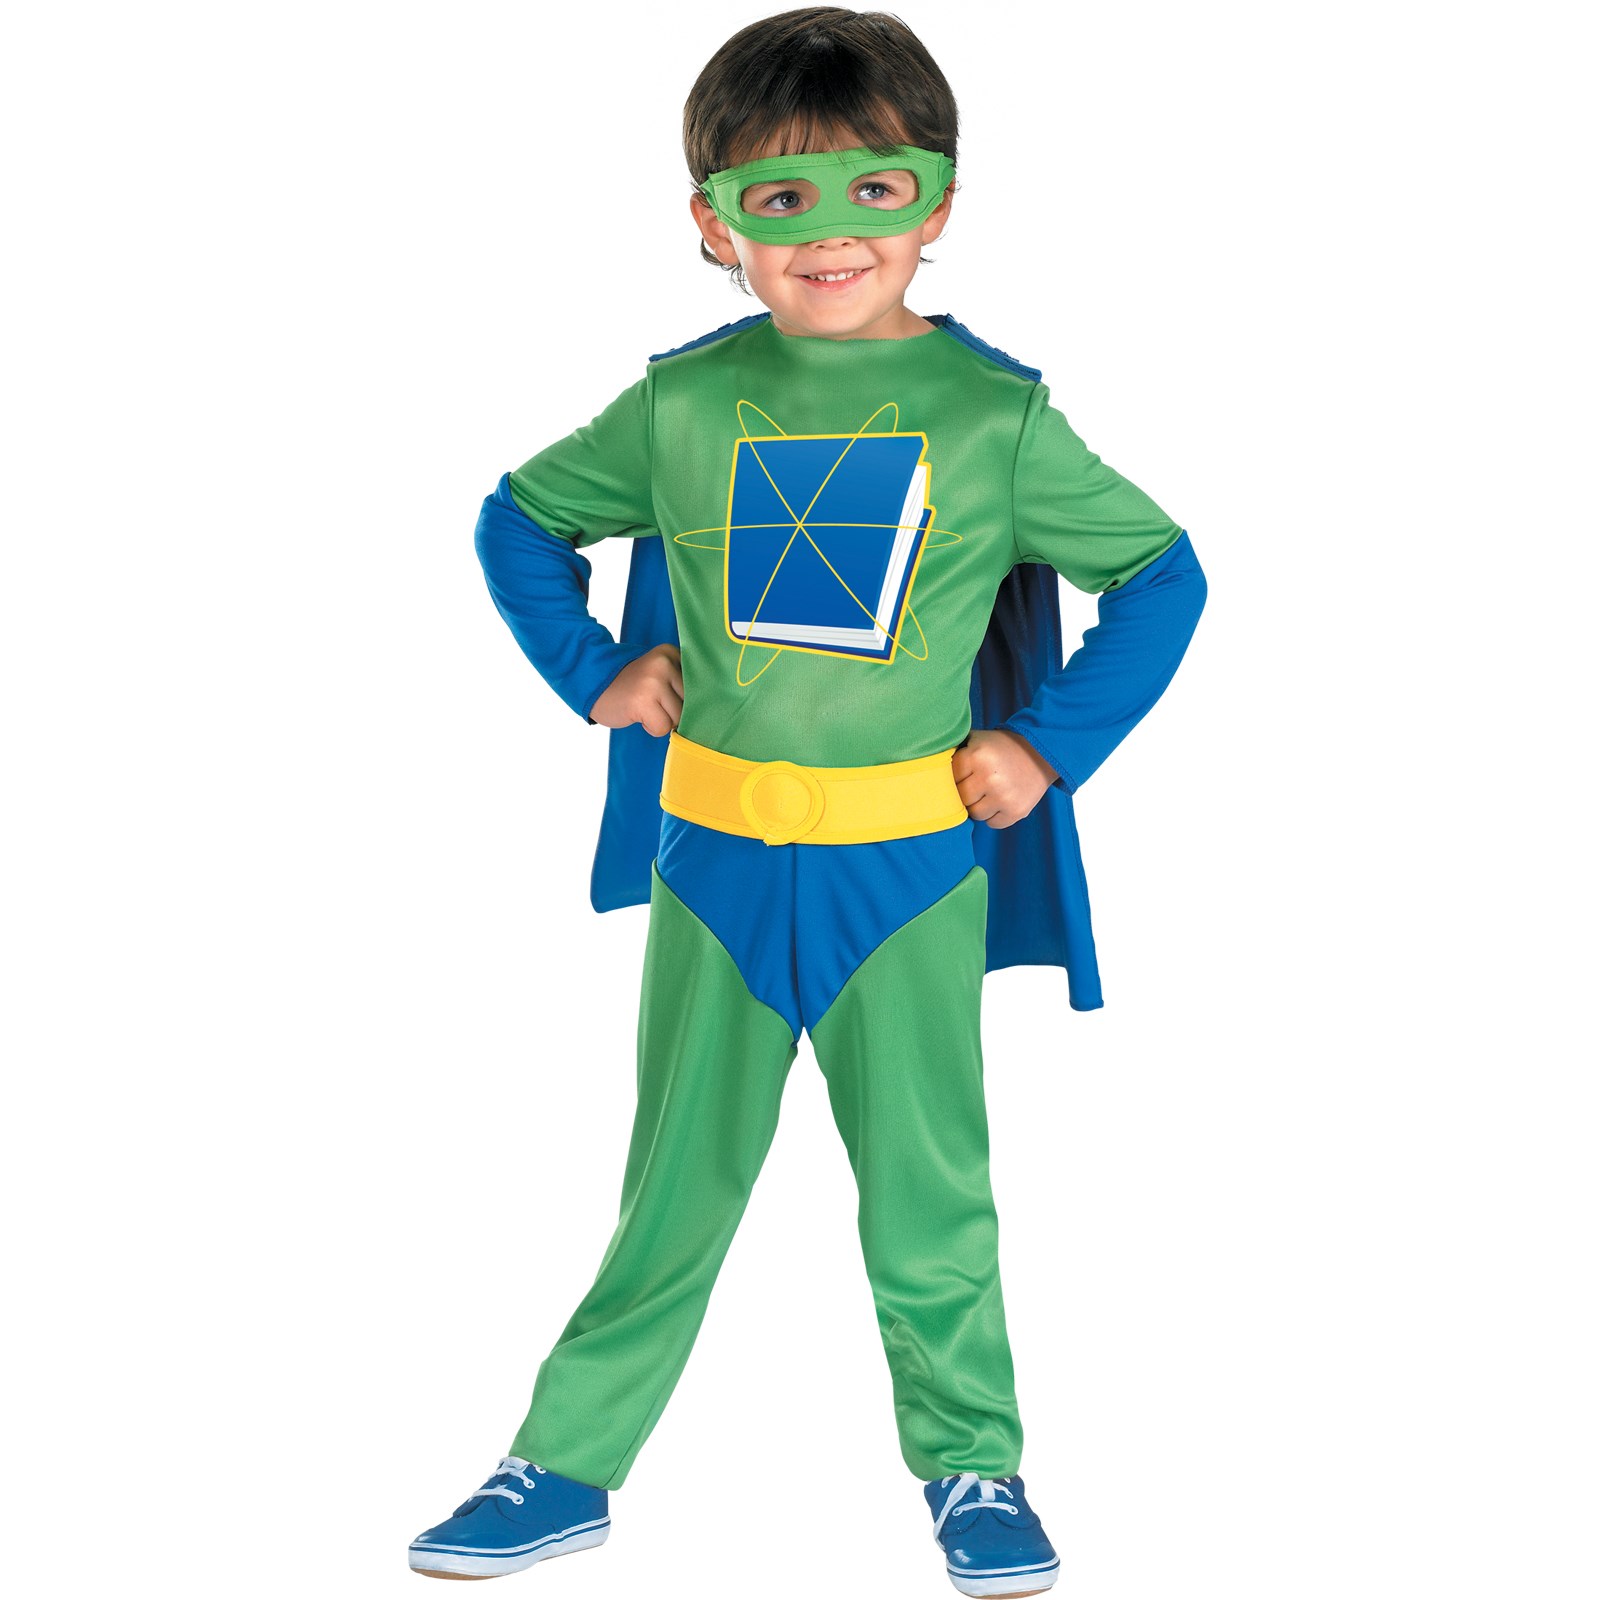 Super Why Toddler / Child Costume